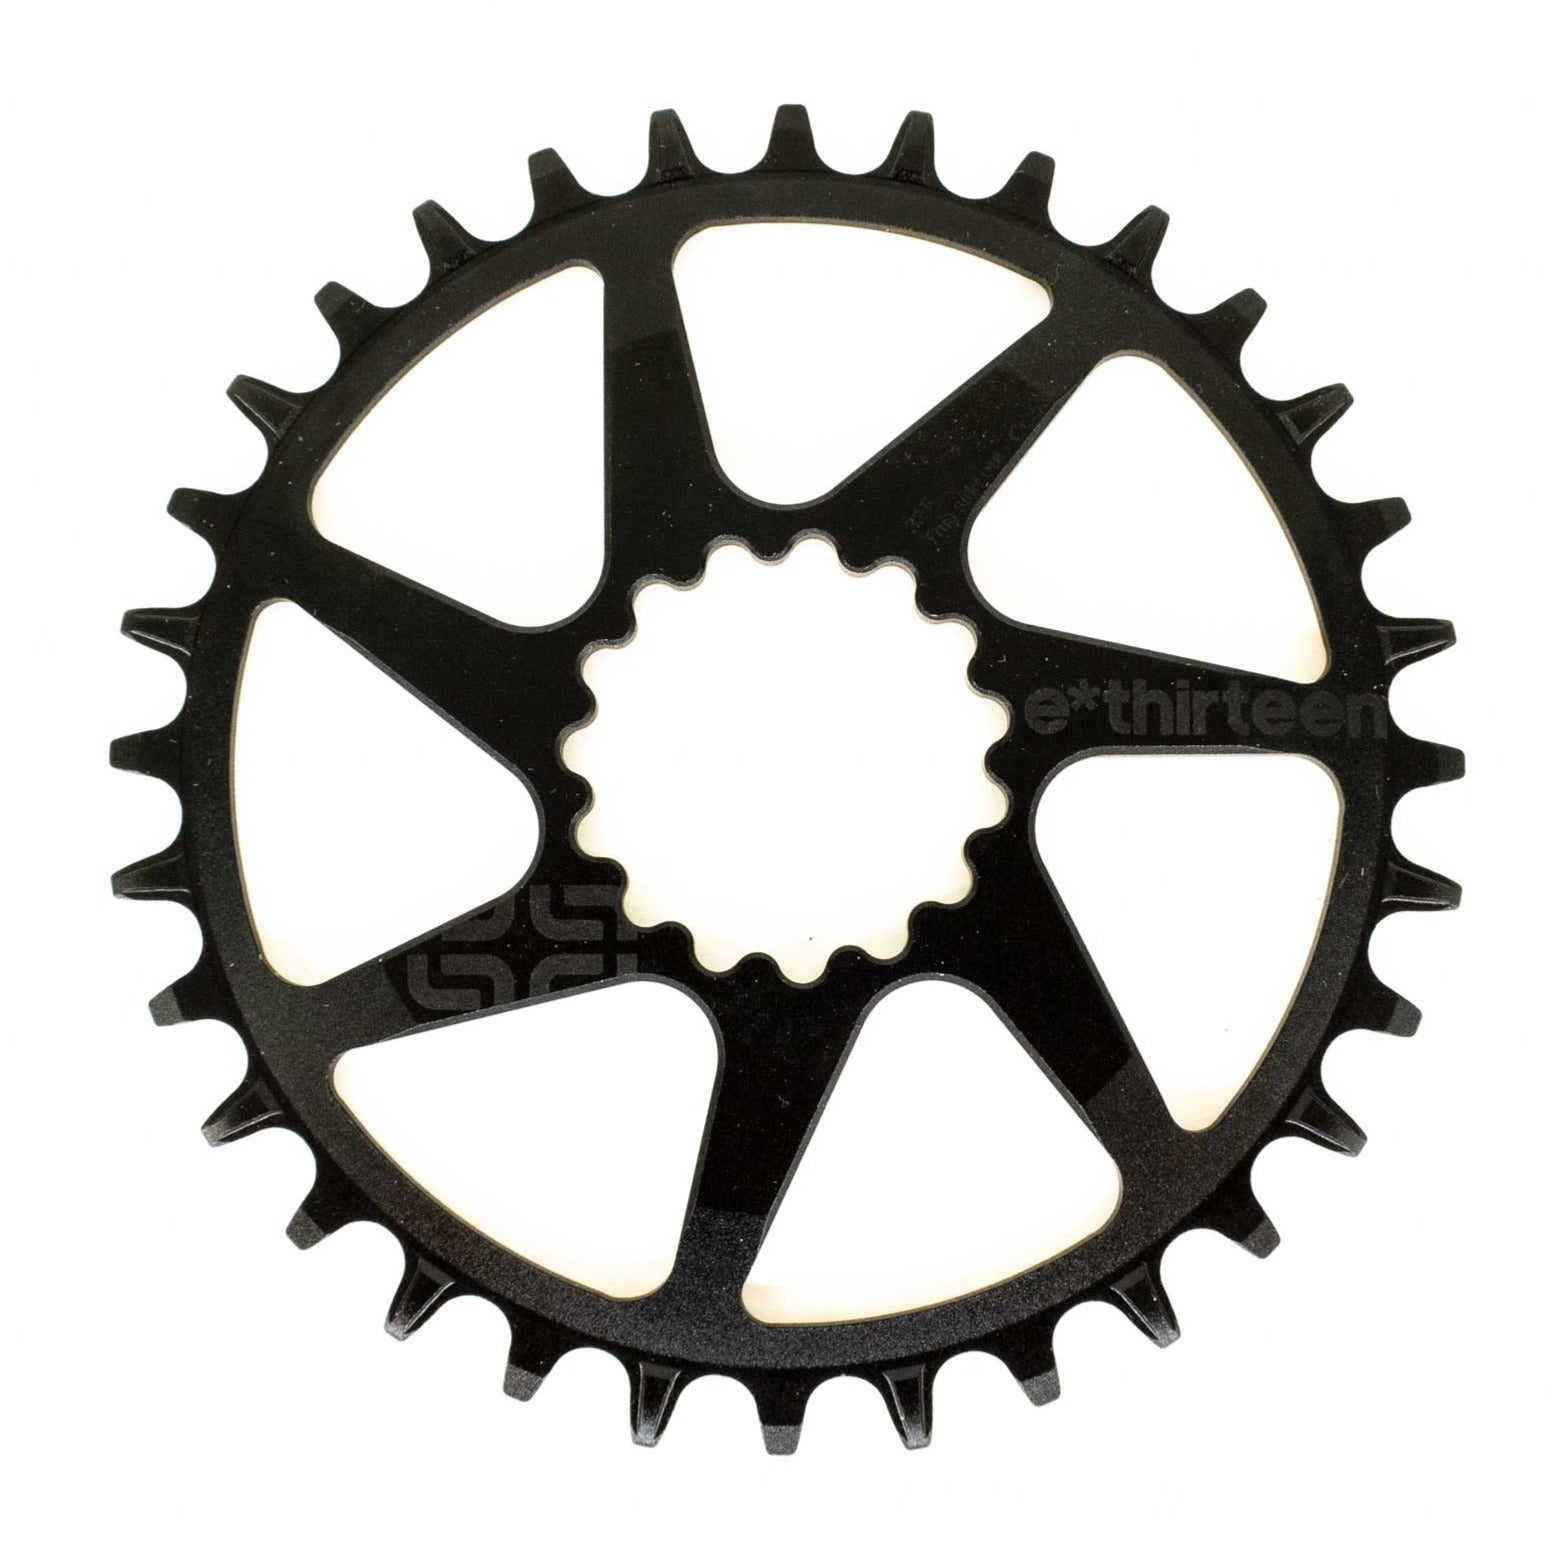 Helix Plus Direct Mount Chainring - CLOSEOUT